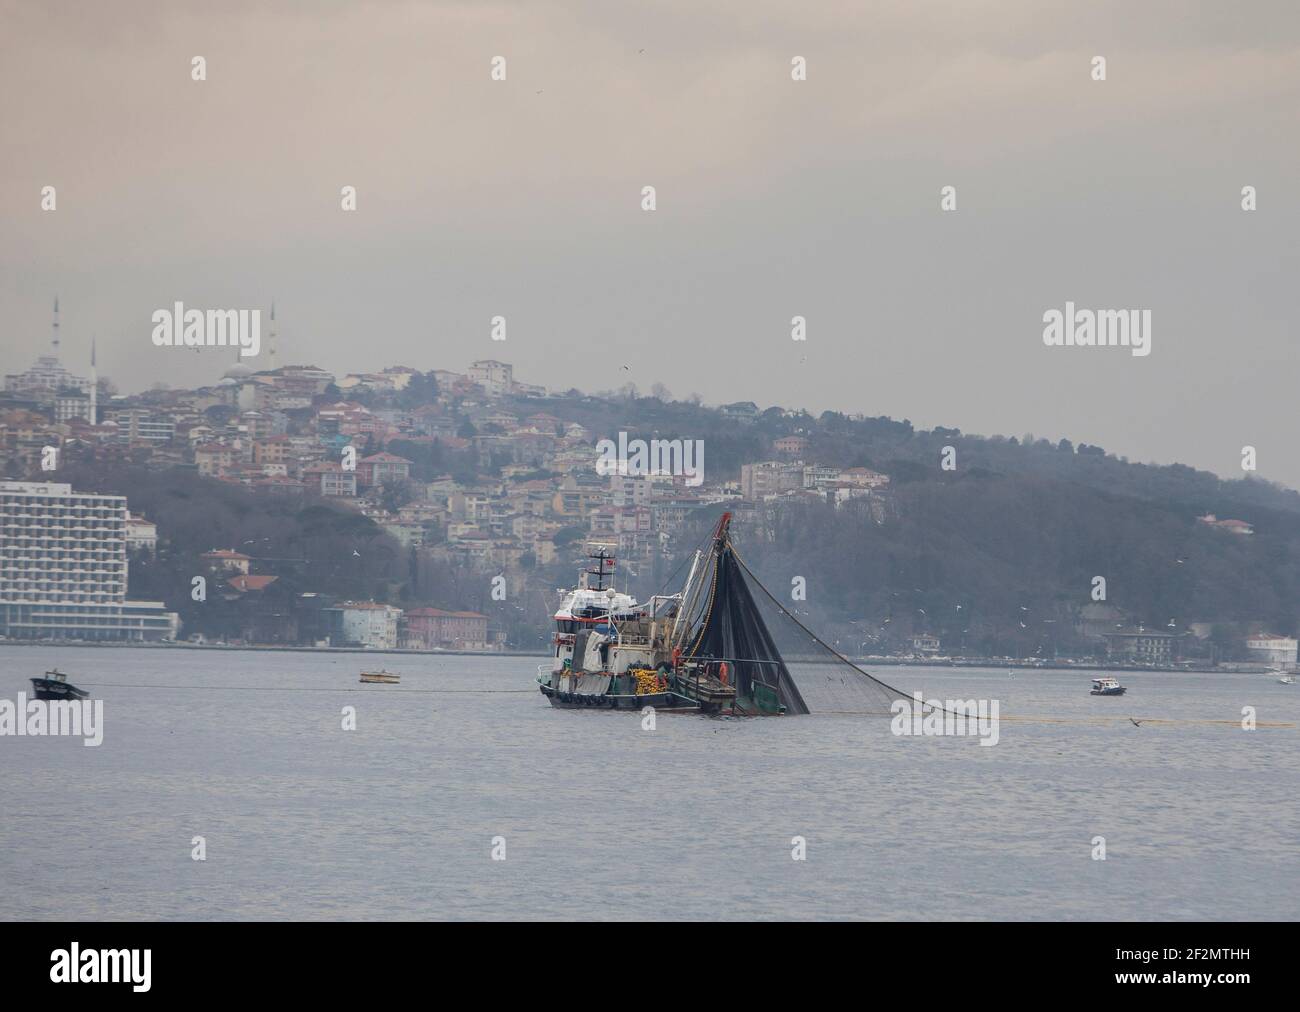 (210312) -- ISTANBUL, March 12, 2021 (Xinhua) -- A fishing boat is seen on the Black Sea in Istanbul, Turkey, on March 6, 2021. The Black Sea is packed with local bottom fishes, including haddock, mullet, and turbot. There are also migrating fishes from the Atlantic Sea, such as bonito, bluefish, anchovy, and horse-mackerel. However, climate change, overfishing, and other natural causes have had tremendous adverse impacts on the stocks of fisheries and aquaculture. Restrictions related to the COVID-19 pandemic, as well as the rising costs of labor, fuel, and equipment also preoccupy the fisher Stock Photo